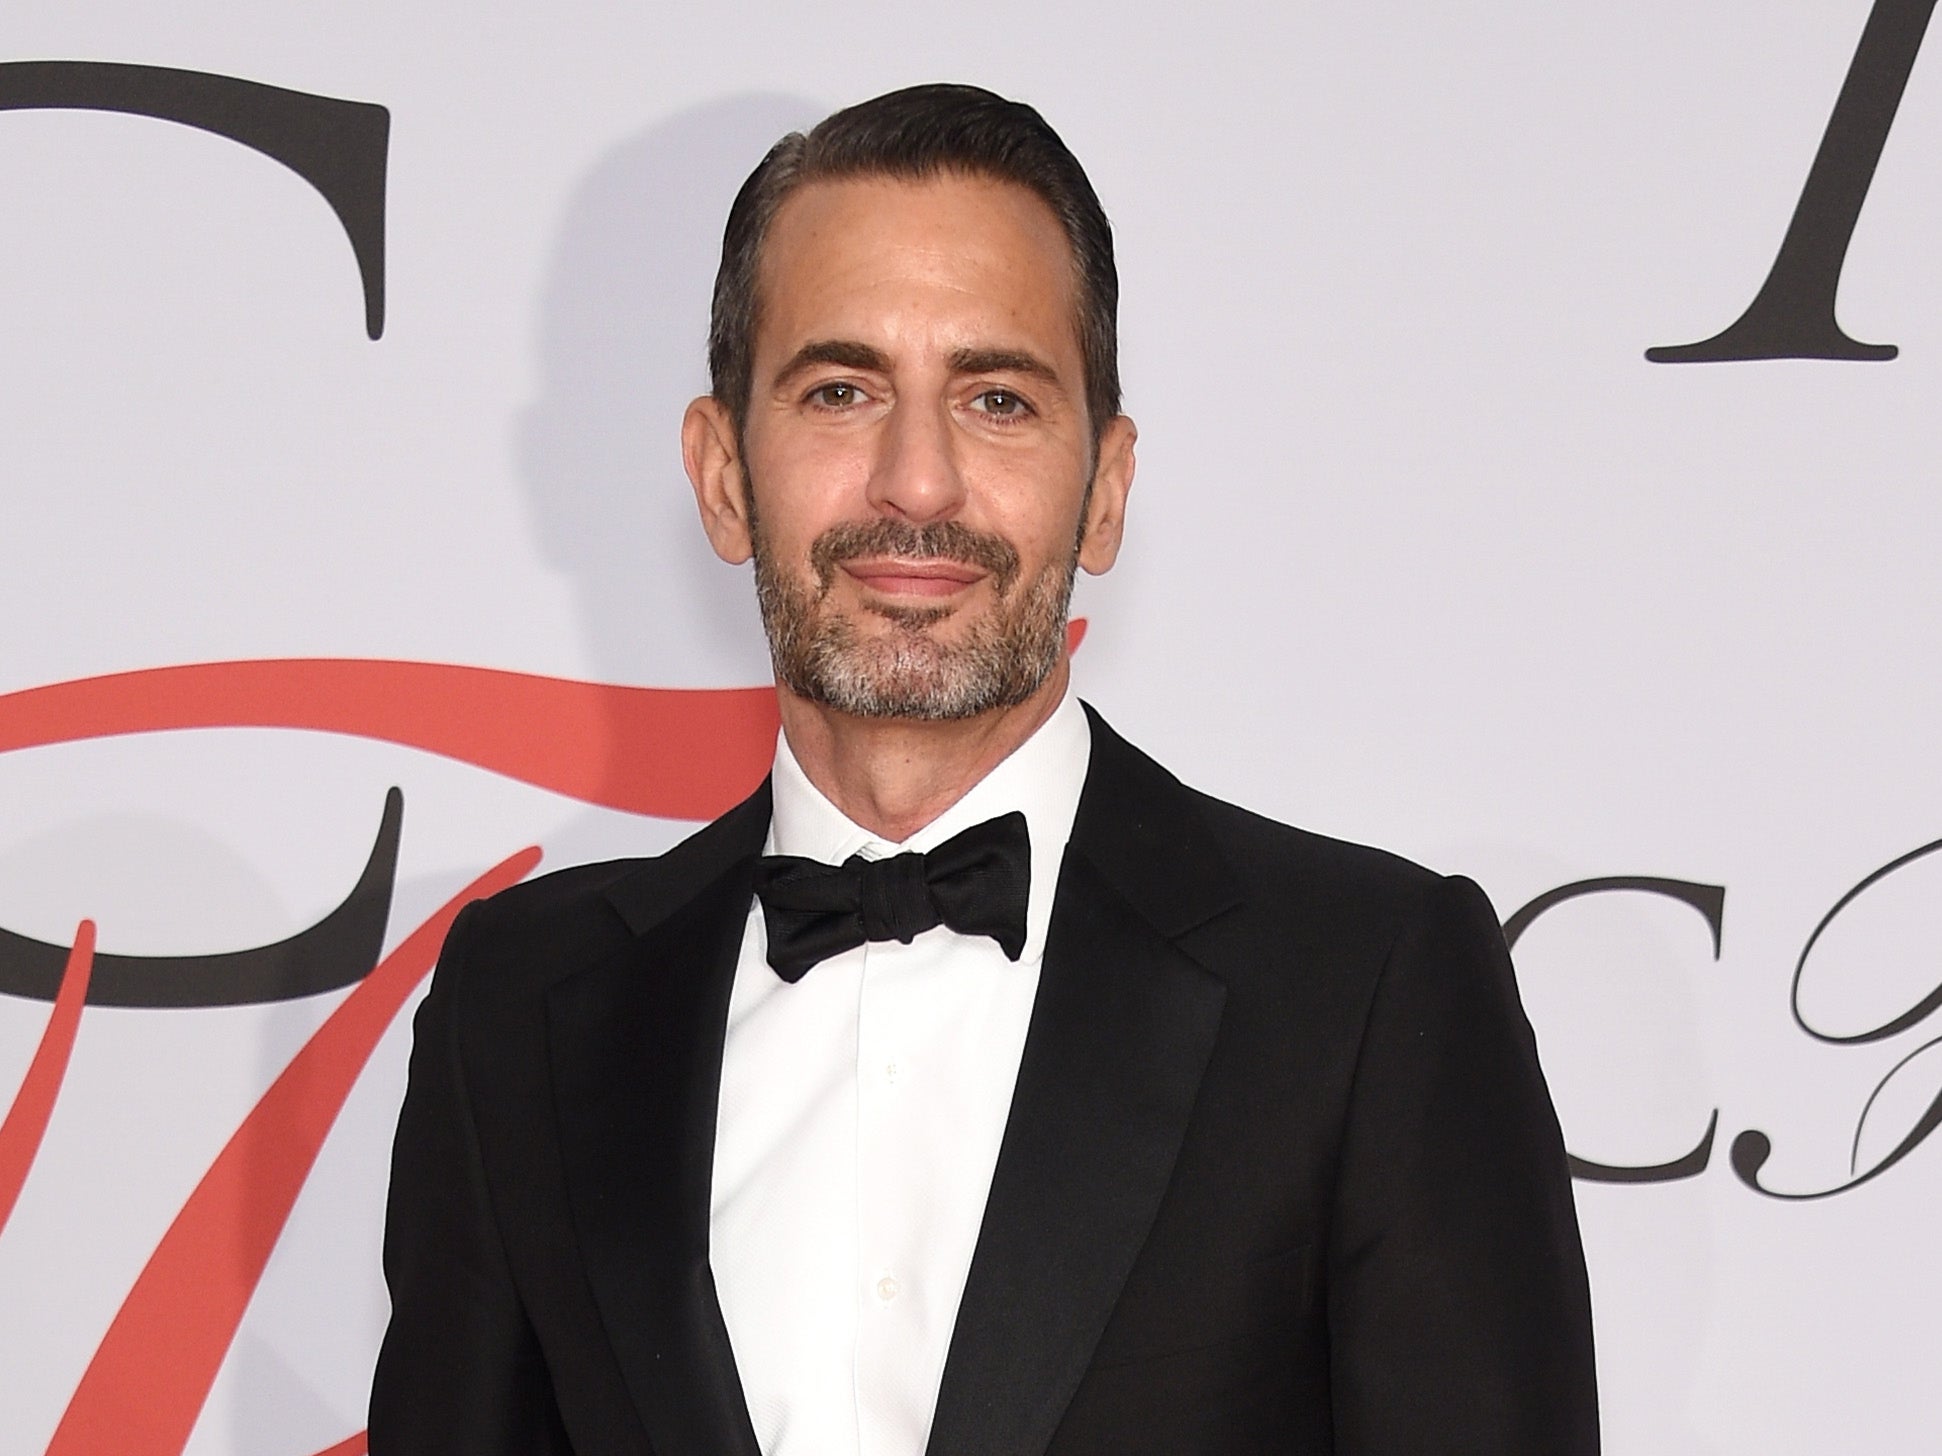 Marc Jacobs shared facelift selfie because he feels ‘no shame in being ...